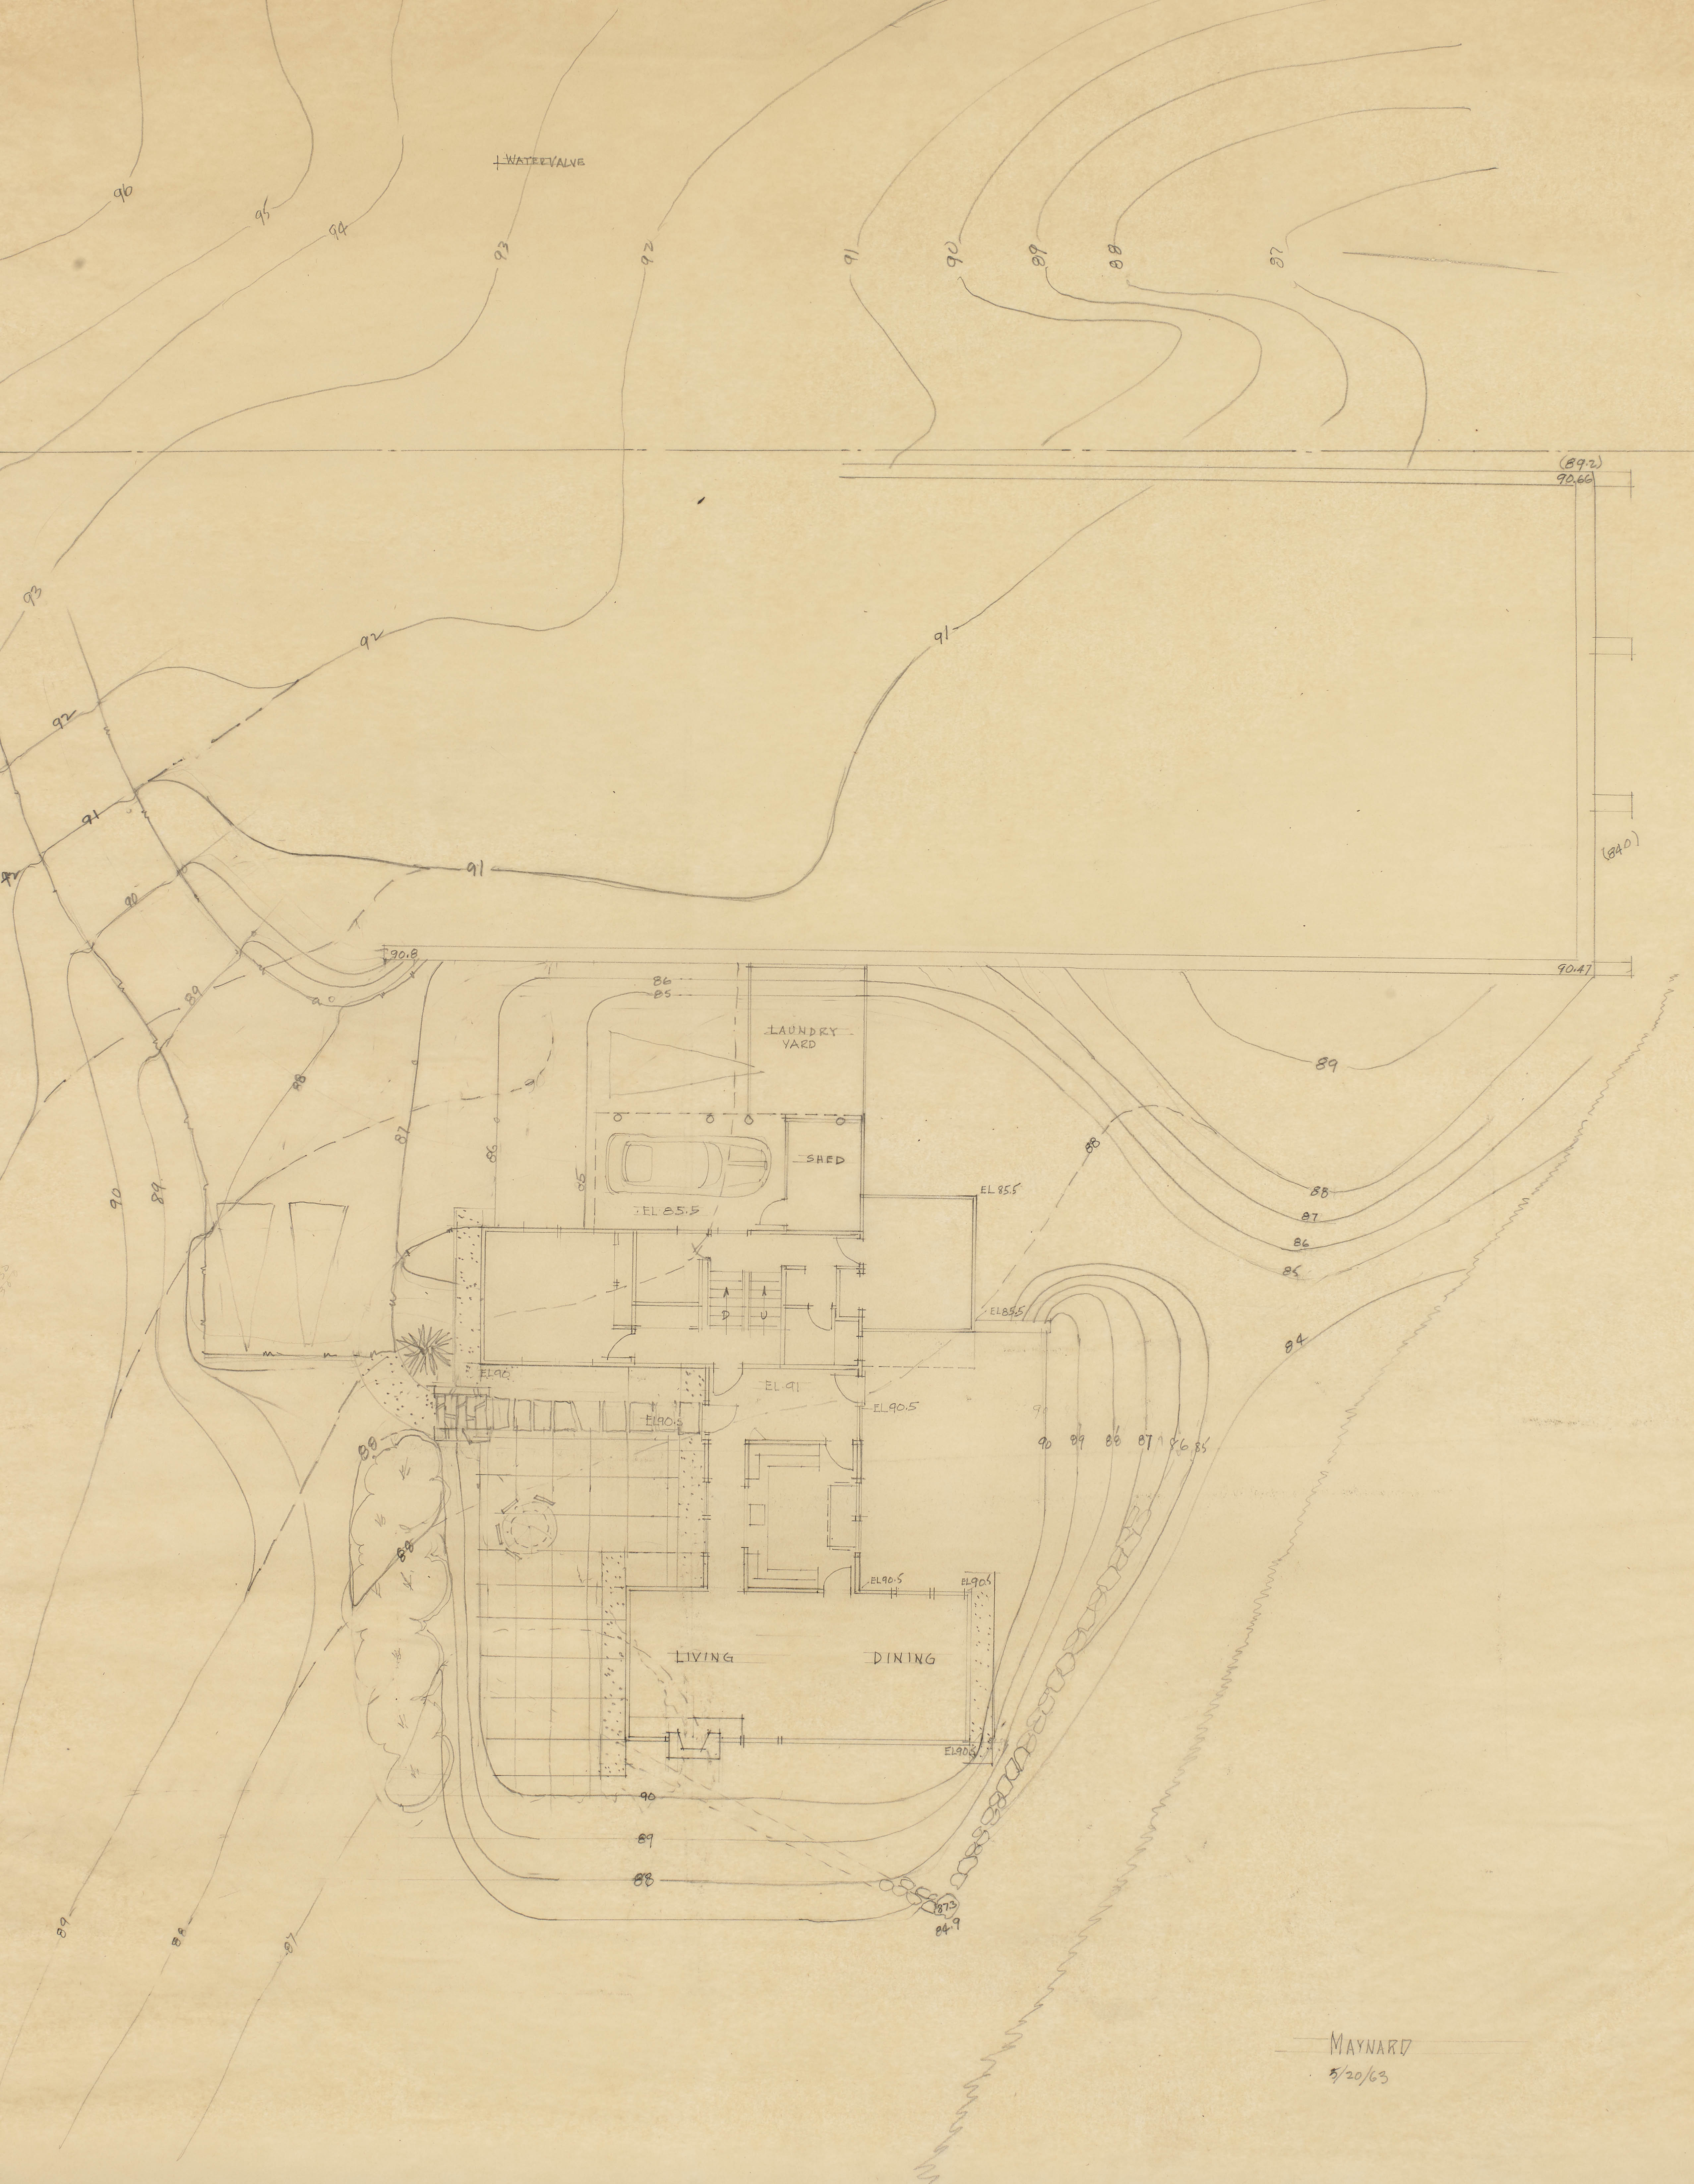 EPM Untitled Large Site Plan, 1963, graphite on tracing paper, 30 x 24 inches